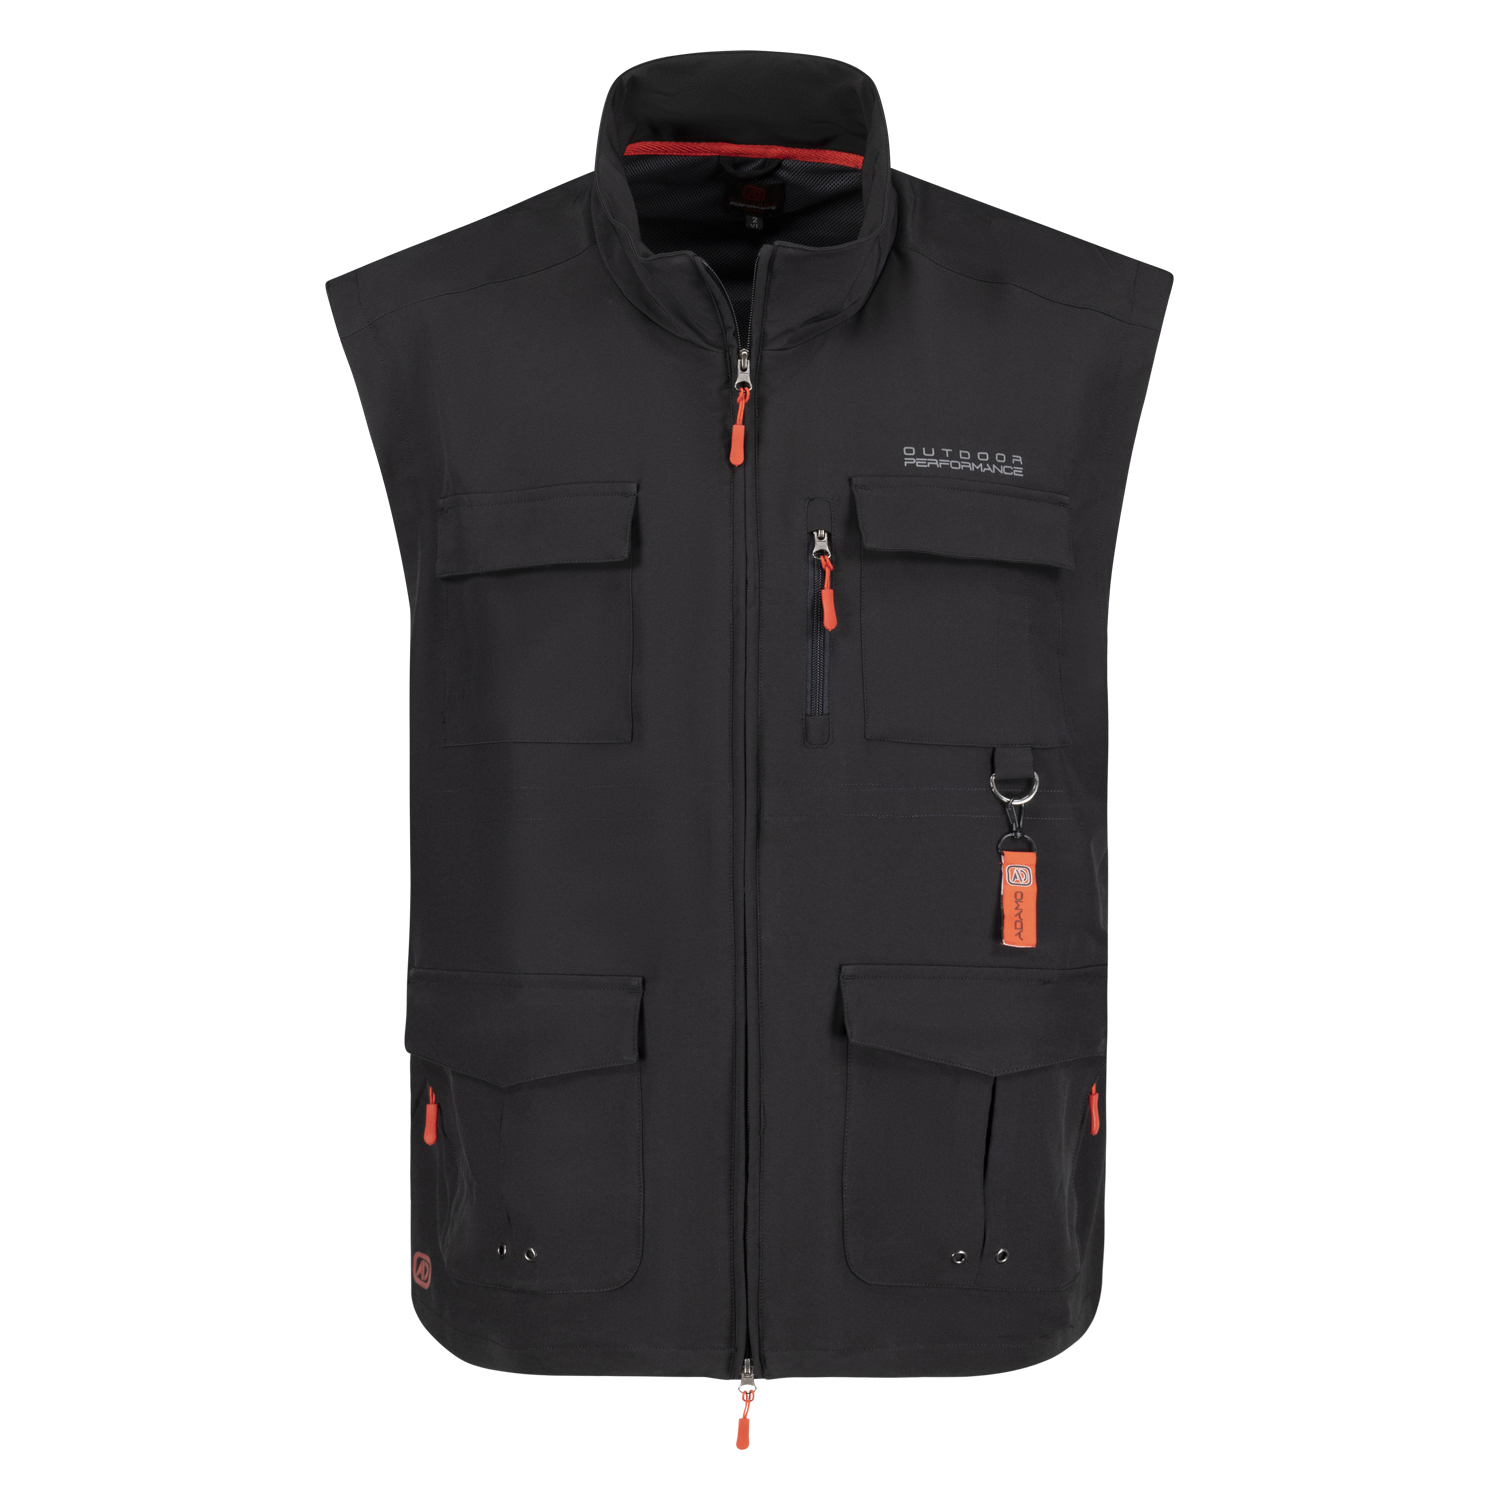 Outdoor vest in black series Tommy by ADAMO up to oversize 12XL